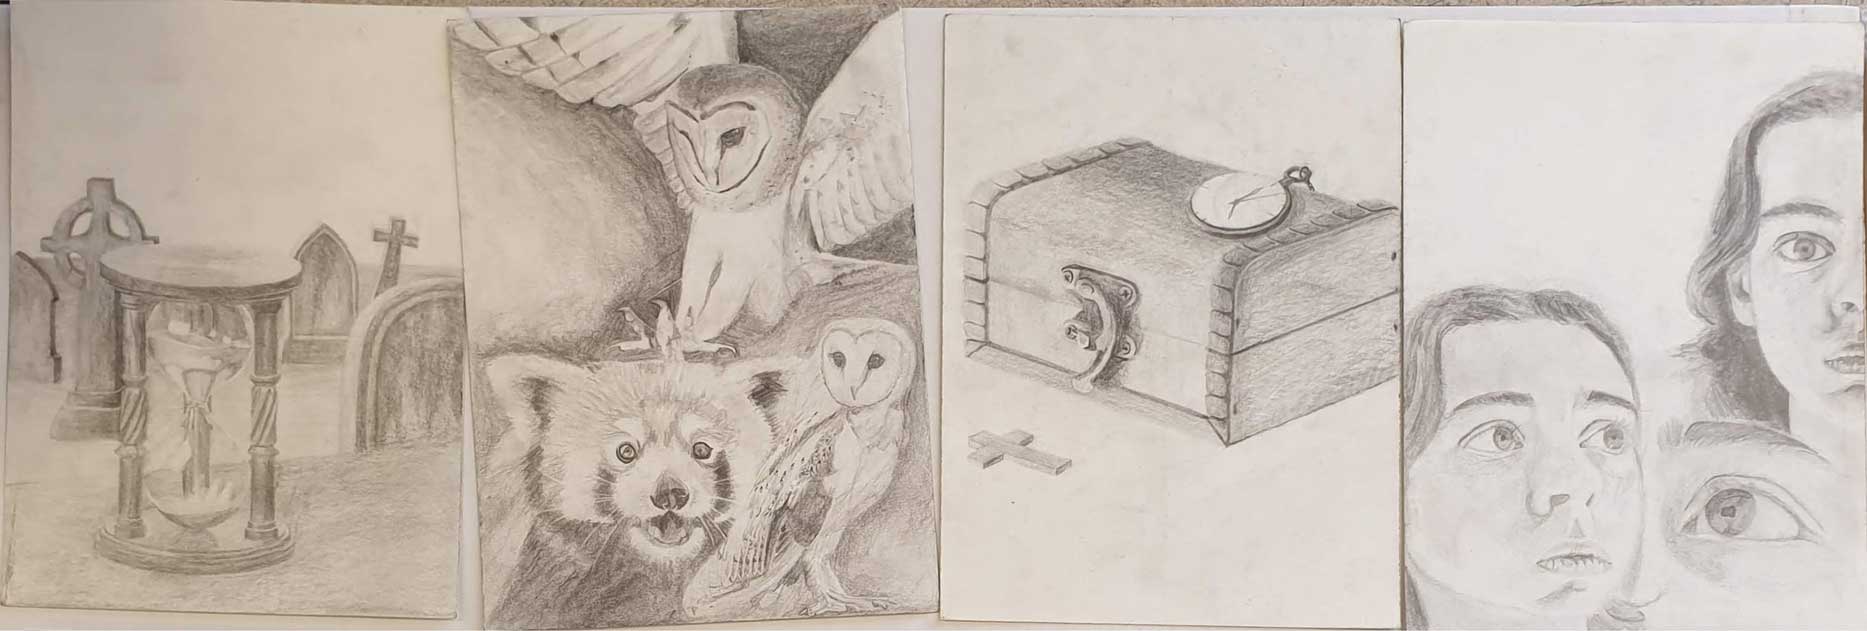 4 penicil drawings,a self portrait, an hourglass surrounded by graves, a redpanda and two barn owls, a jewelery box